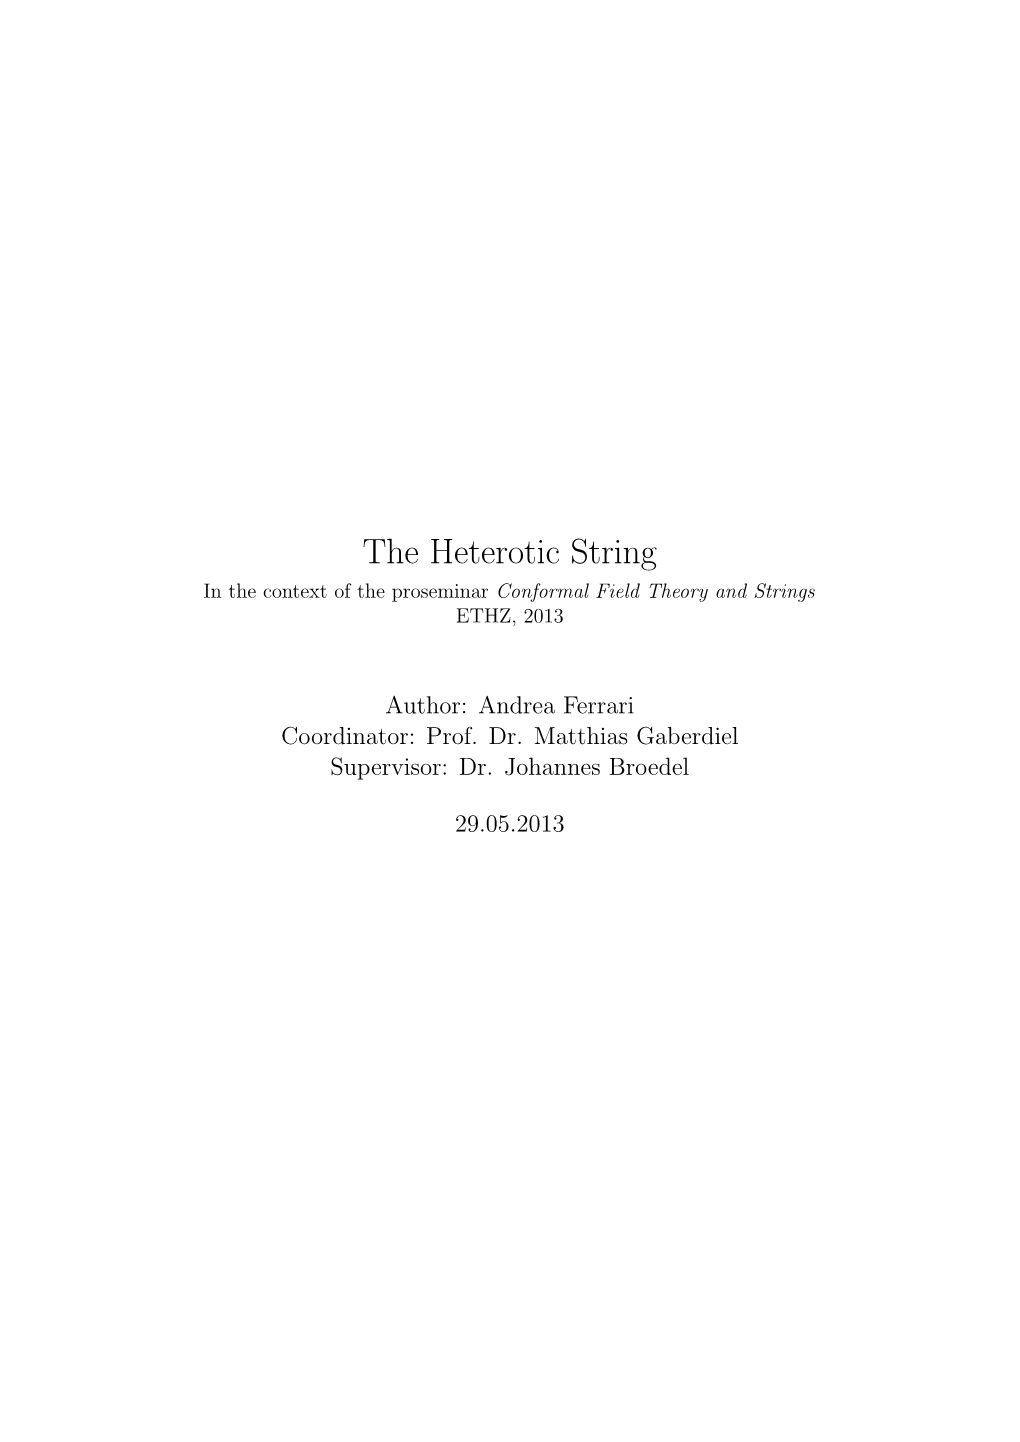 The Heterotic String in the Context of the Proseminar Conformal Field Theory and Strings ETHZ, 2013